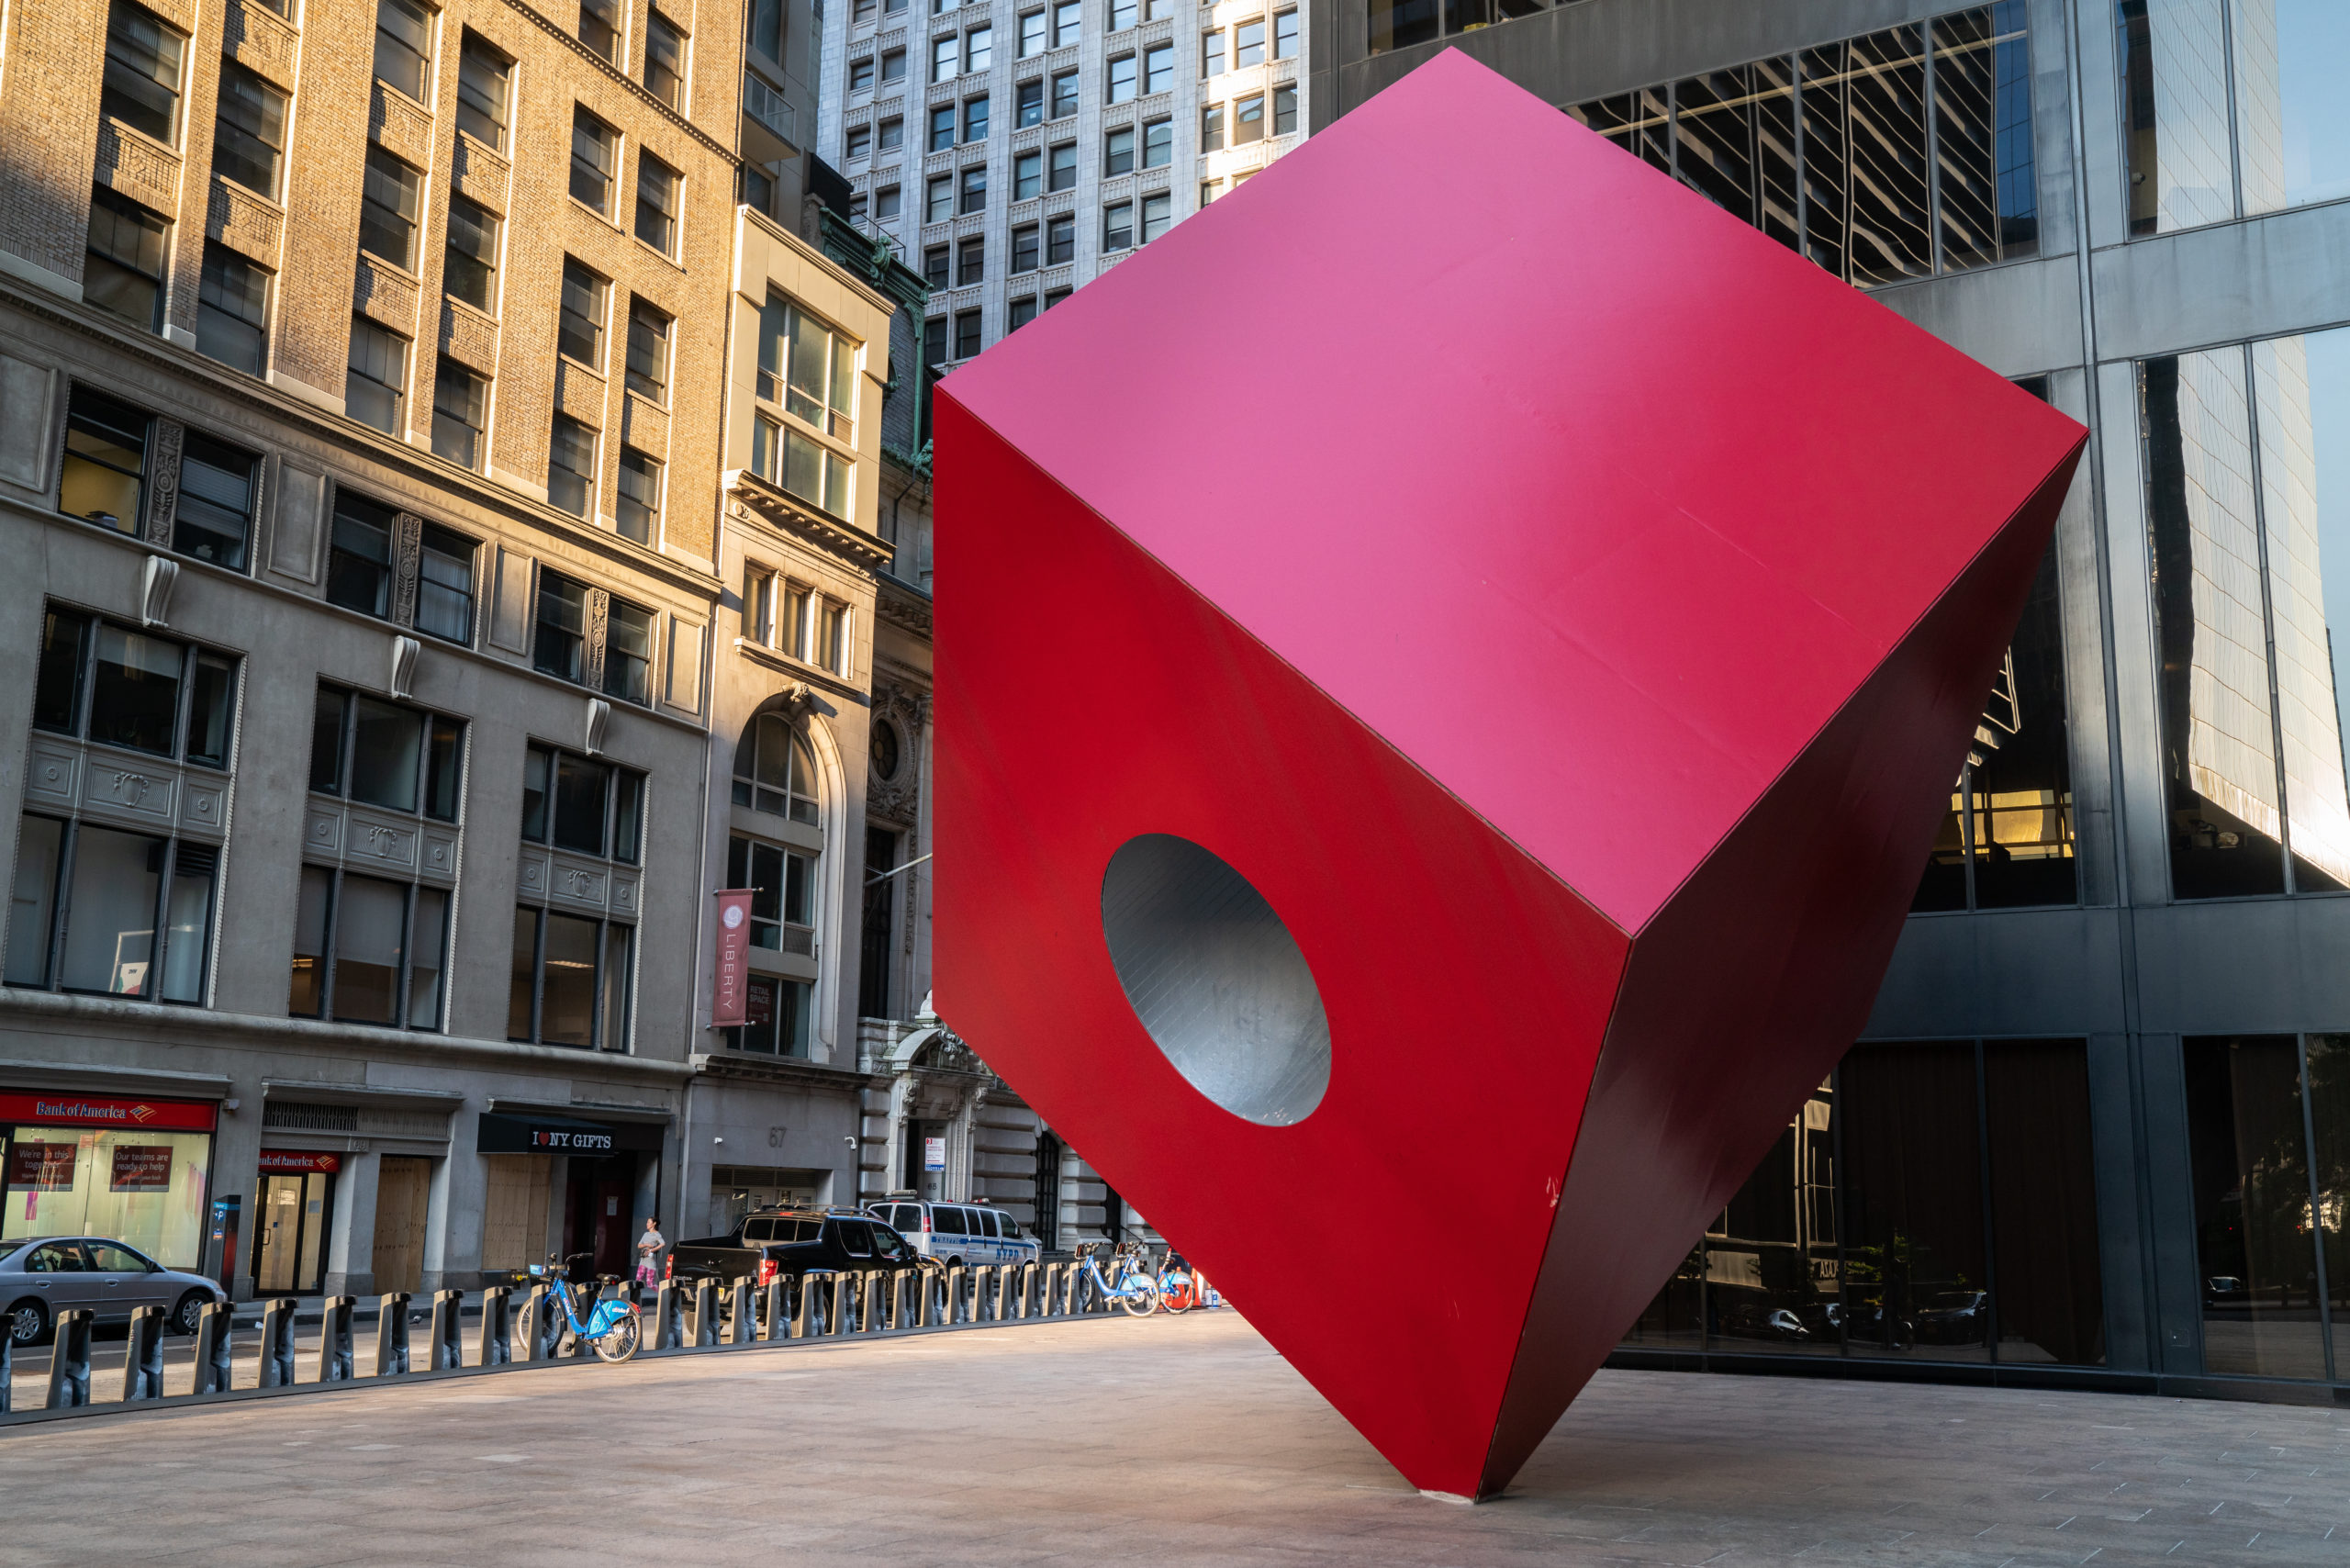 https://publicdelivery.org/wp-content/uploads/2022/07/Isamu-Noguchi-Red-Cube-1968-steel-aluminum-24-feet-tall-installation-view-140-Broadway-New-York-scaled.jpg